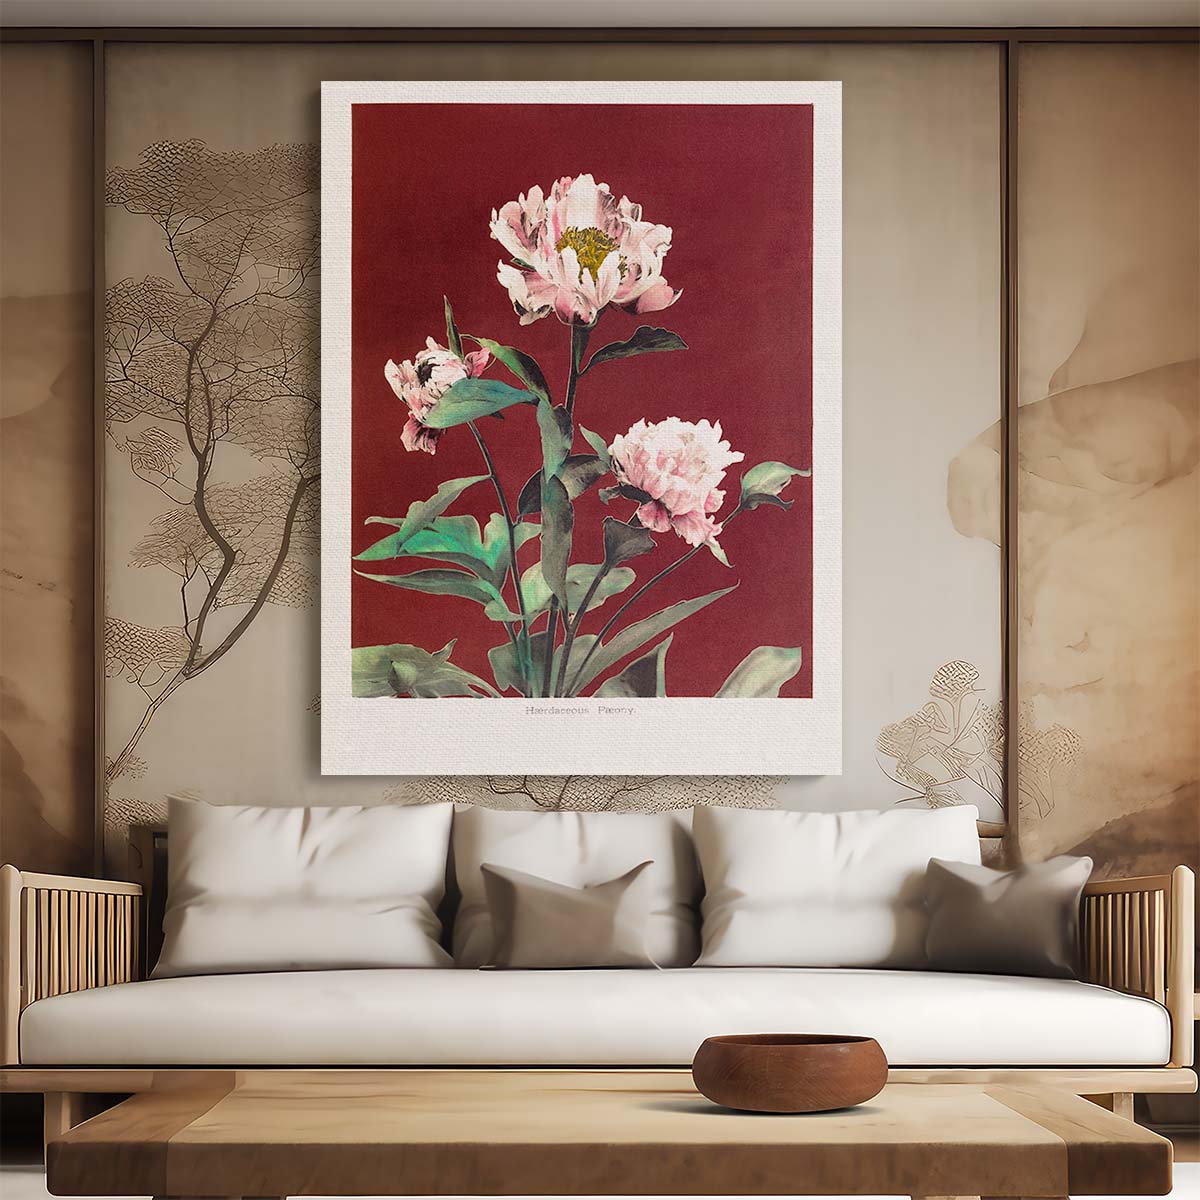 Vintage Japanese Peony Illustration by Master Artist Koson by Luxuriance Designs, made in USA